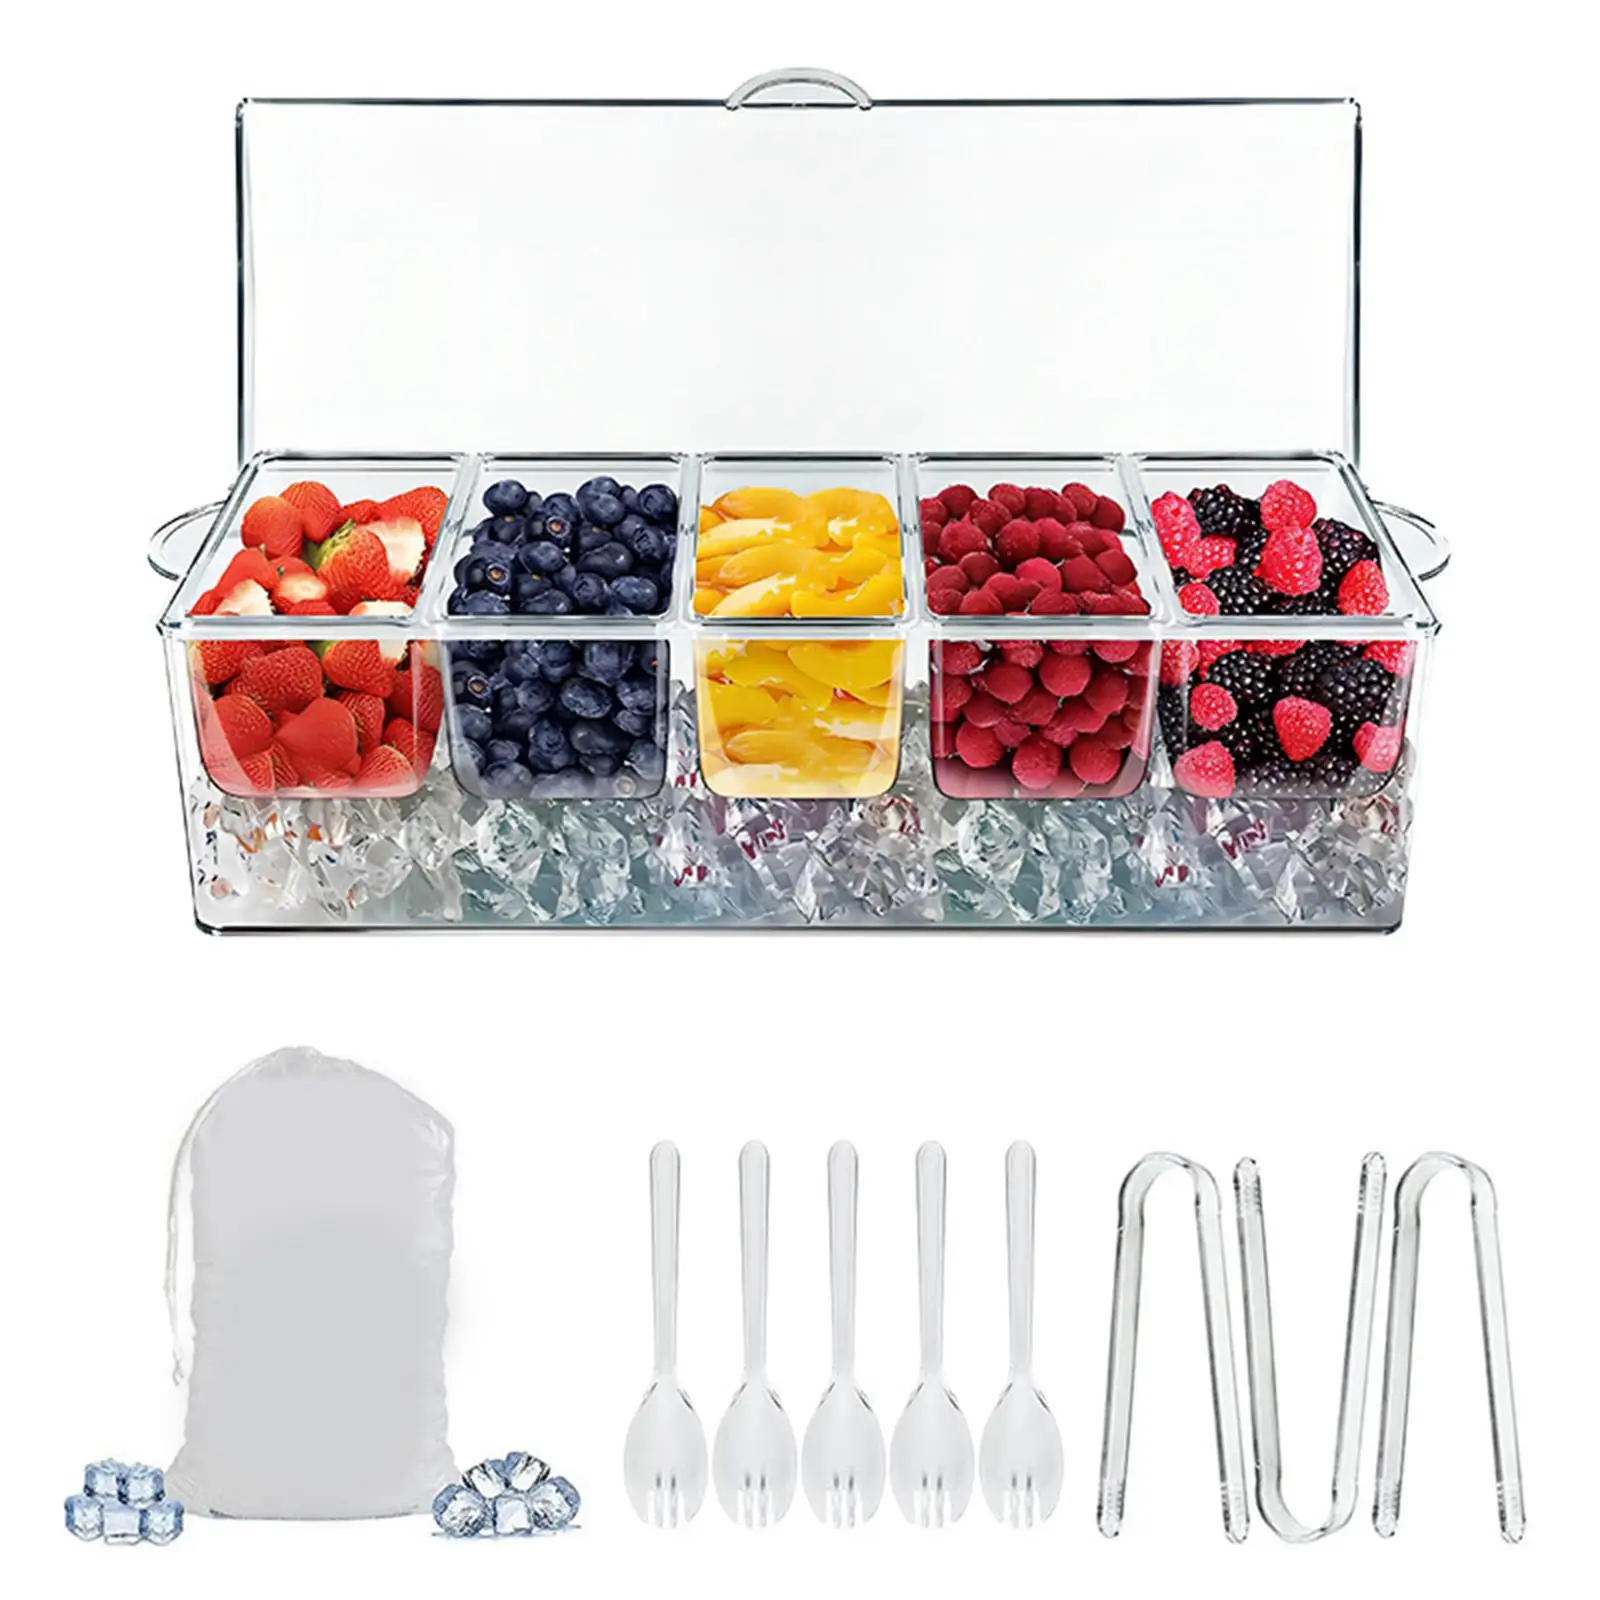 Ice Chilled Serving Tray Set 5 Compartment for Keeping Cool,